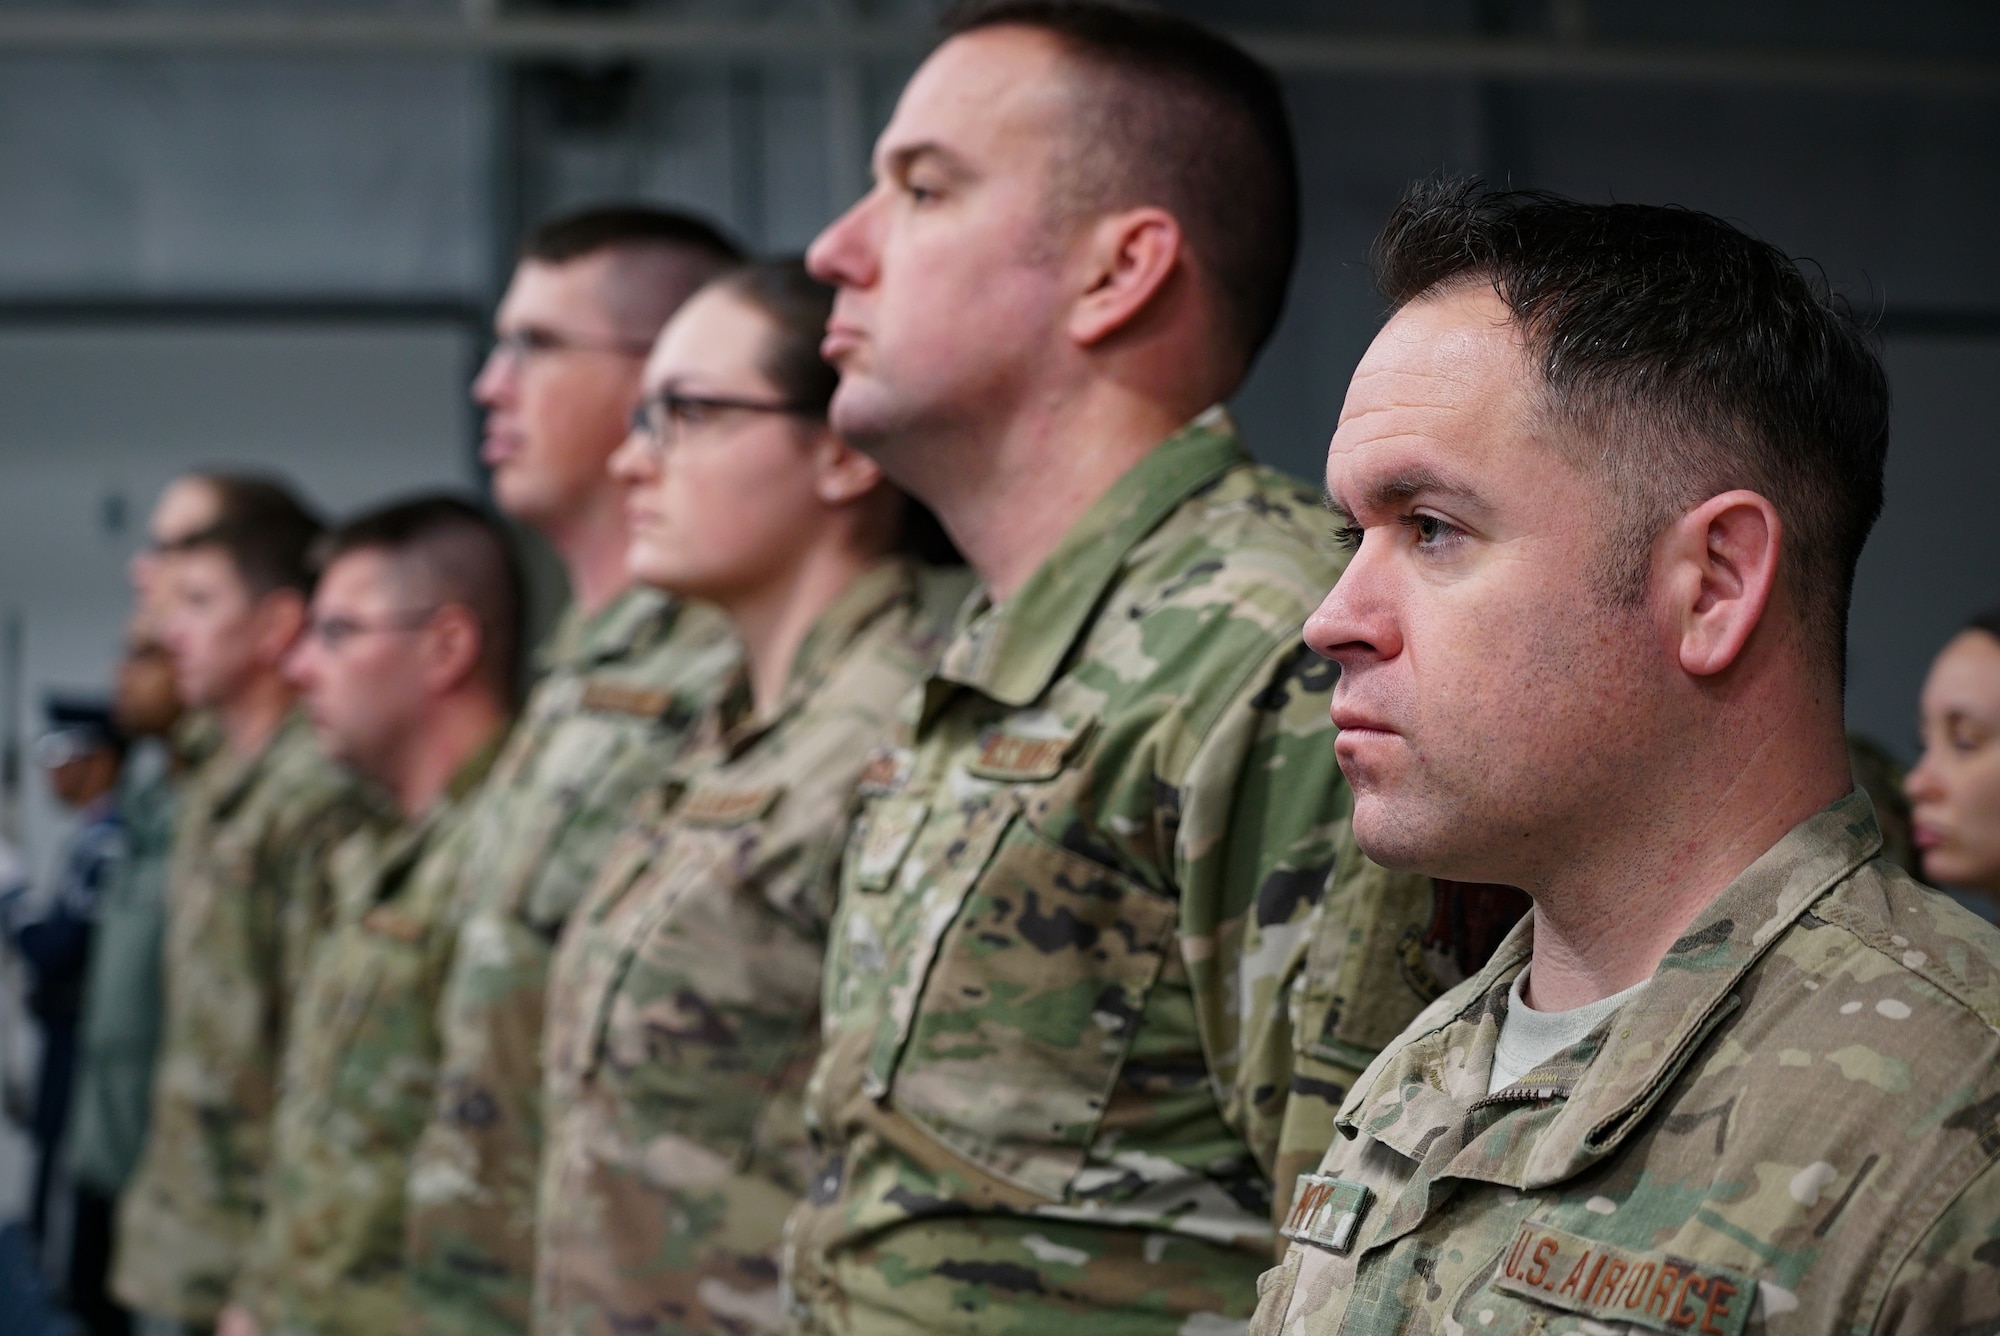 Members of the 319th Security Forces Squadron stand at attention during the presentation of colors Dec. 20, 2019, during a memorial ceremony on Grand Forks Air Force Base, North Dakota. The ceremony was held in memory of military working dog “Dex,” who served as a narcotic detector dog with his most recent handler, Staff Sgt. Sean King, 319th Security Forces Squadron.  (U.S. Air Force photo by Senior Airman Elora J. Martinez)